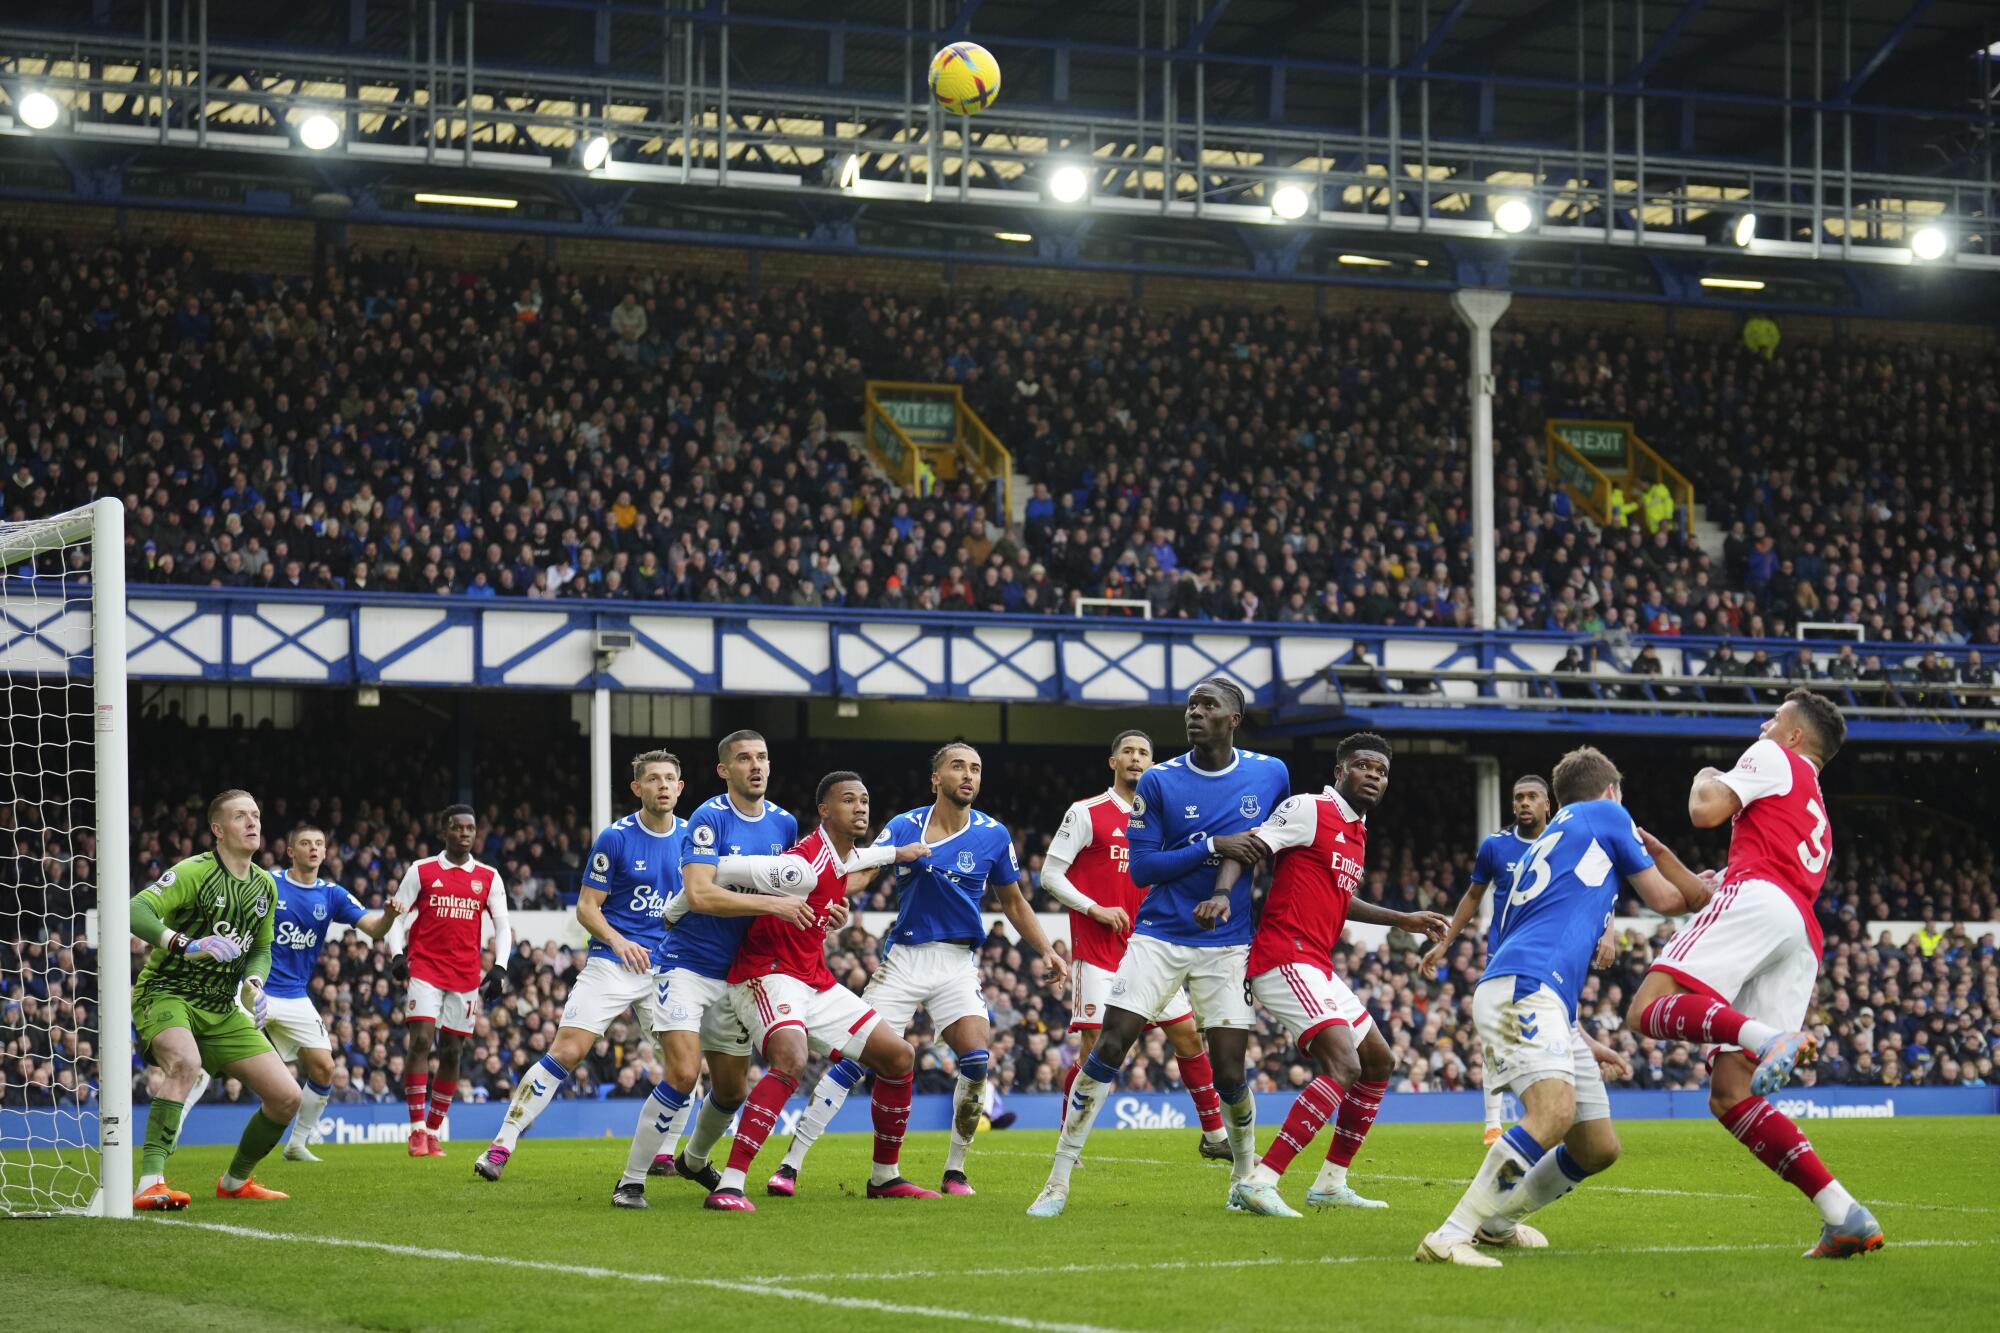 Everton plays Arsenal during an English Premier League match at Goodison Park in Liverpool, England, on Feb. 4. 